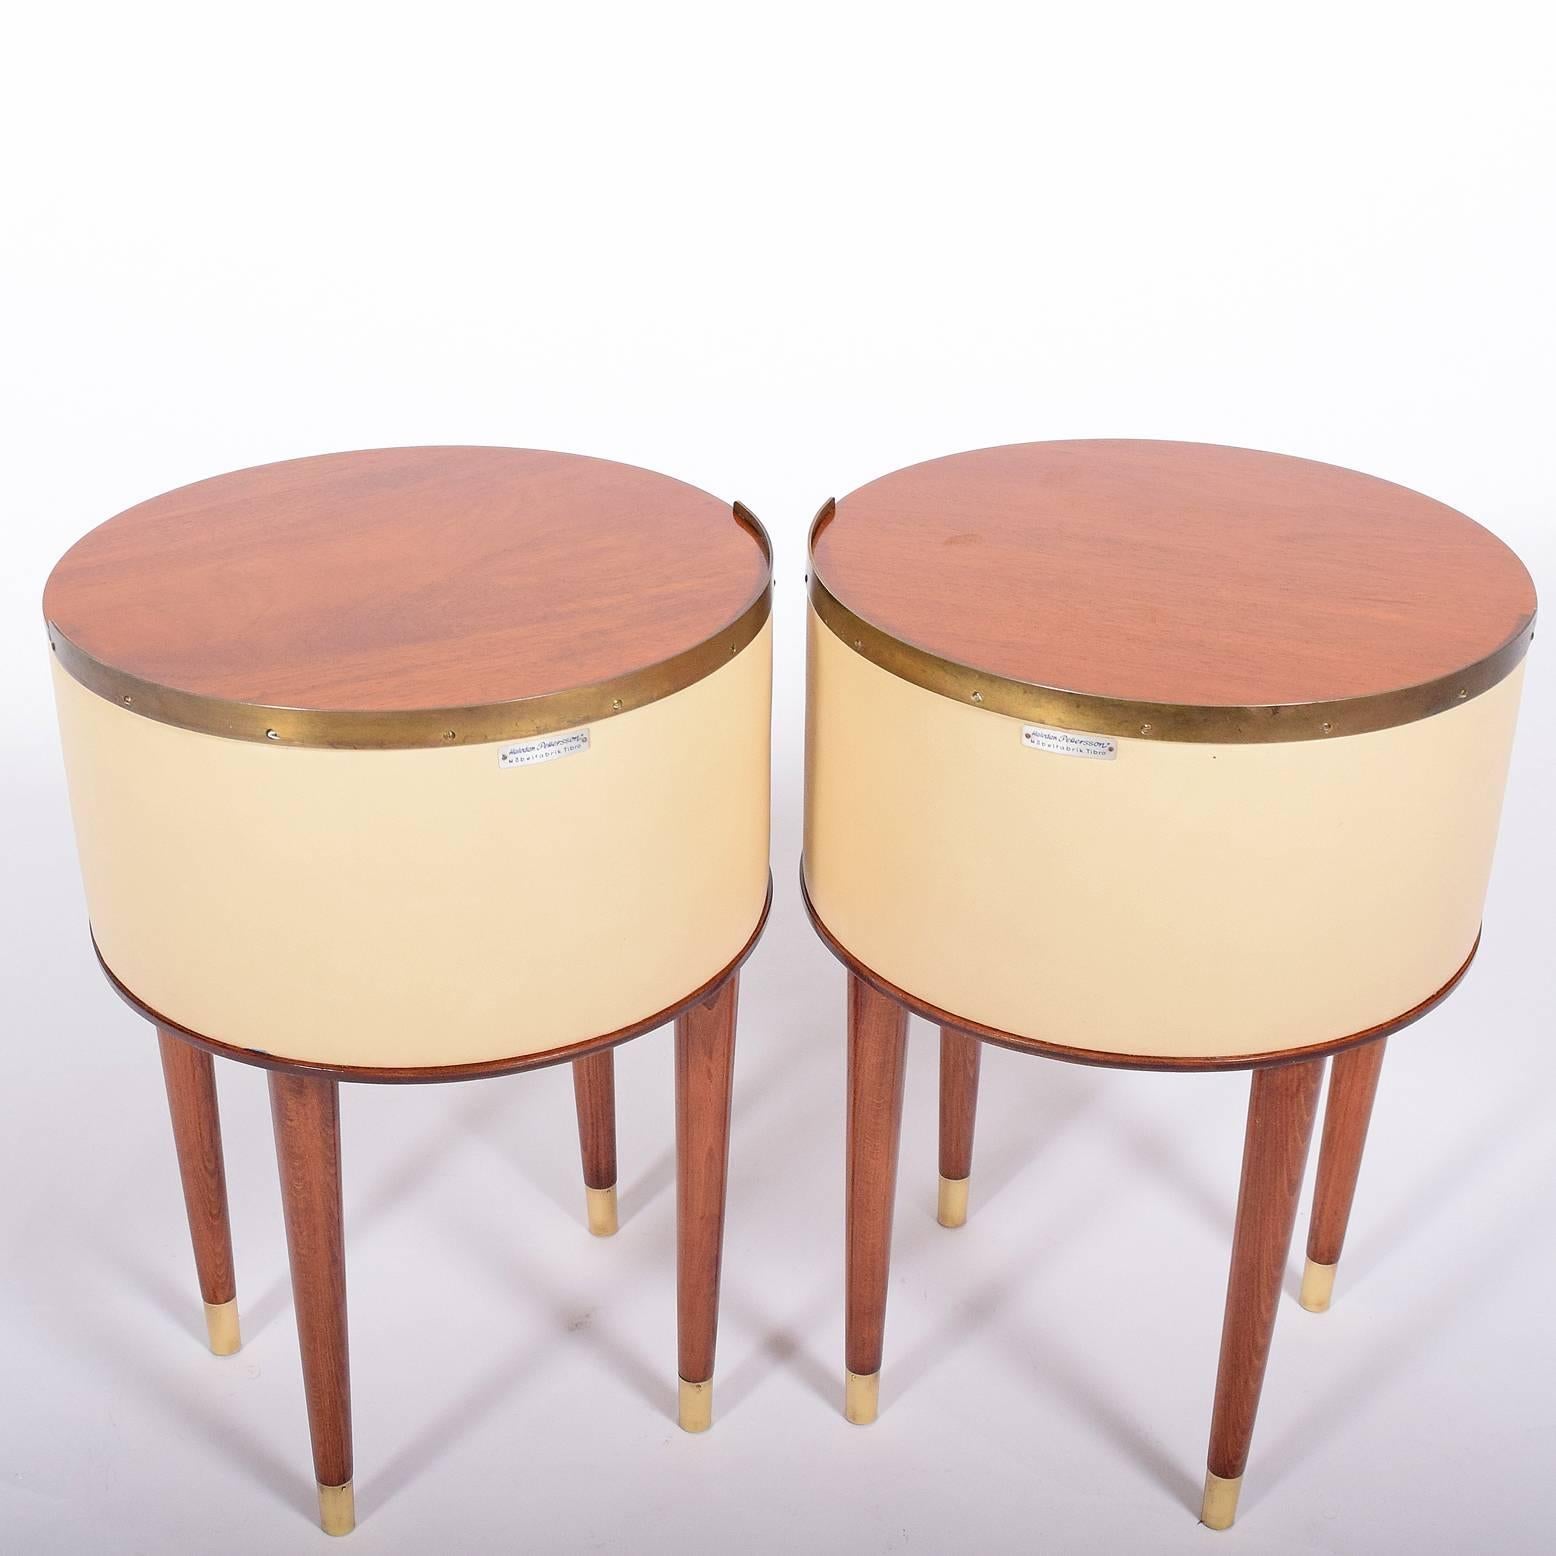 Pair of mahogany brass and vinyl tables/nightstands designed by Halvdan Pettersson in the 1950s for Tibro Möbelfabrik.